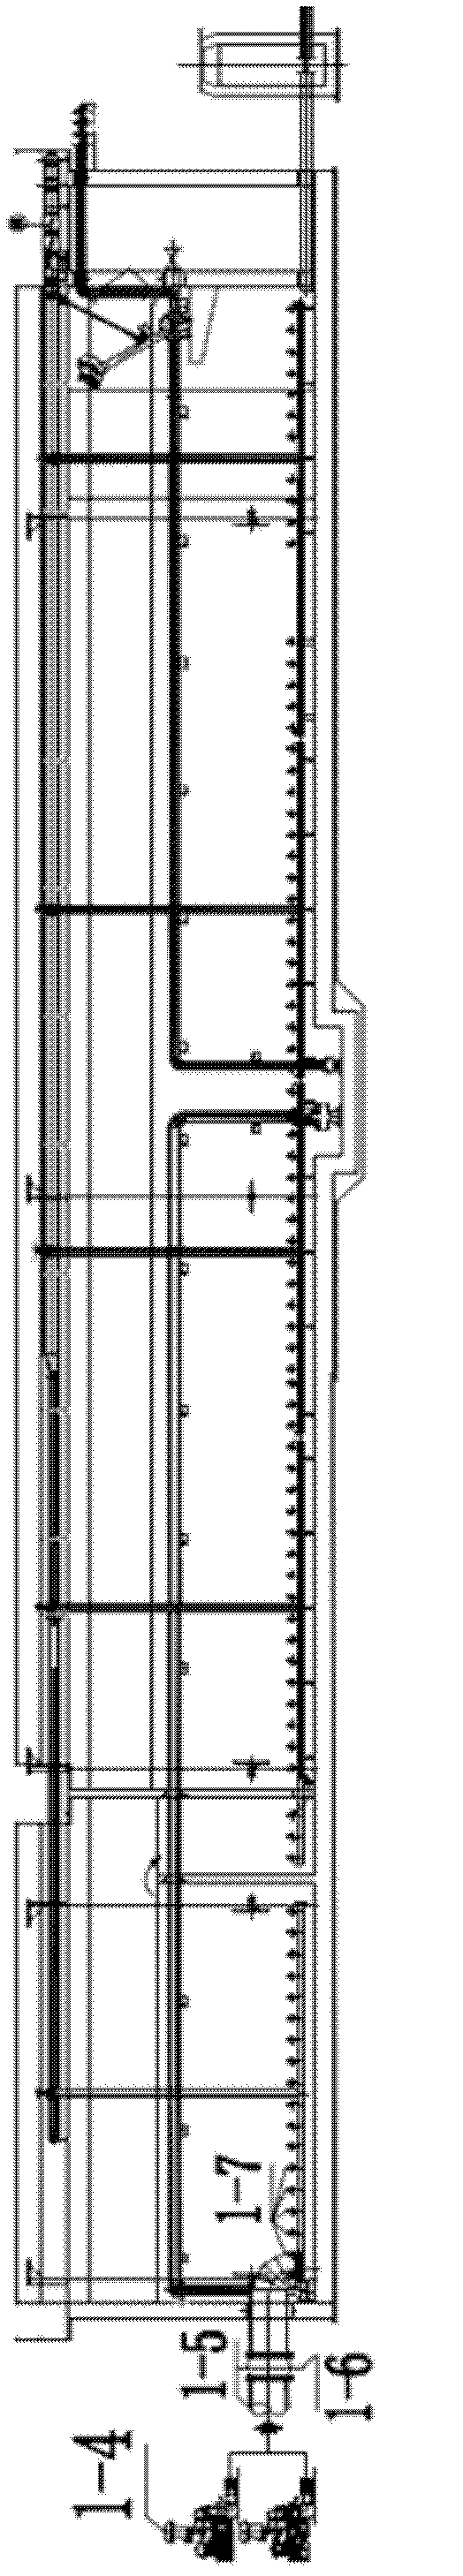 Reversed-order SBR (Sequencing Batch Reactor) water processing device and method for enhanced nitrogen removal